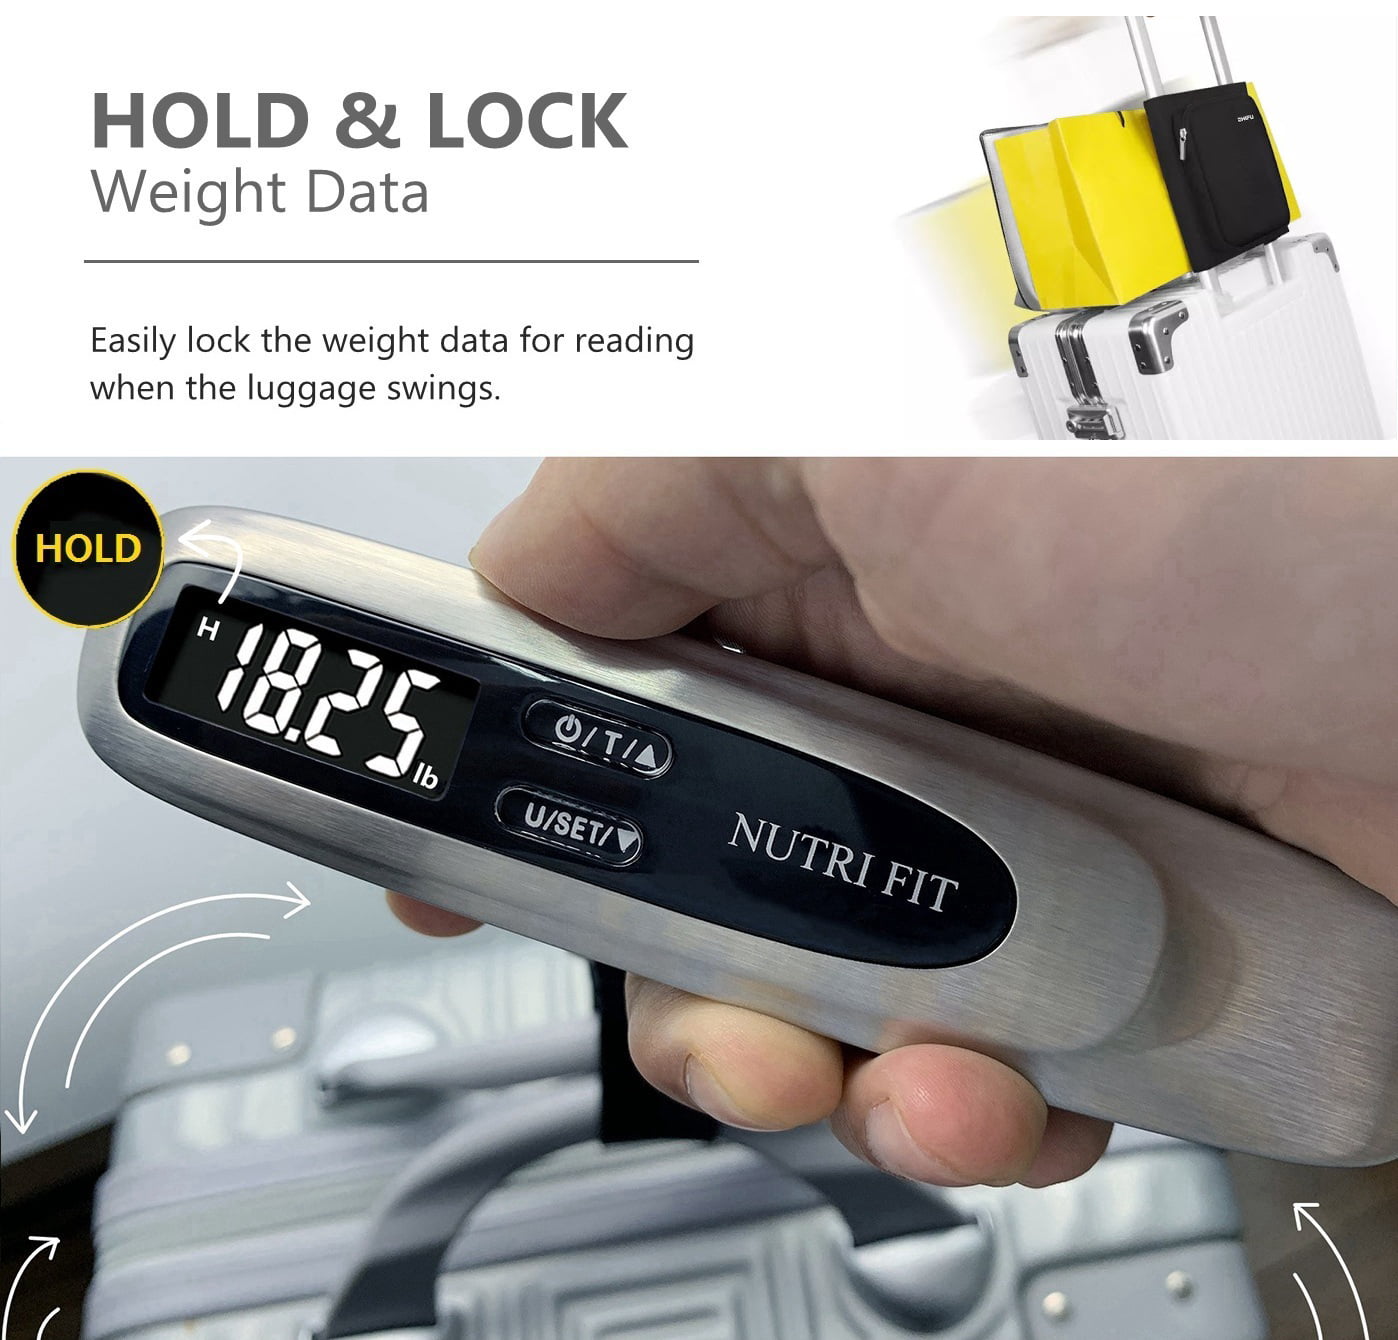 Link Digital Luggage Scale Must Havetravel Accessory Upto 110lbs : Target